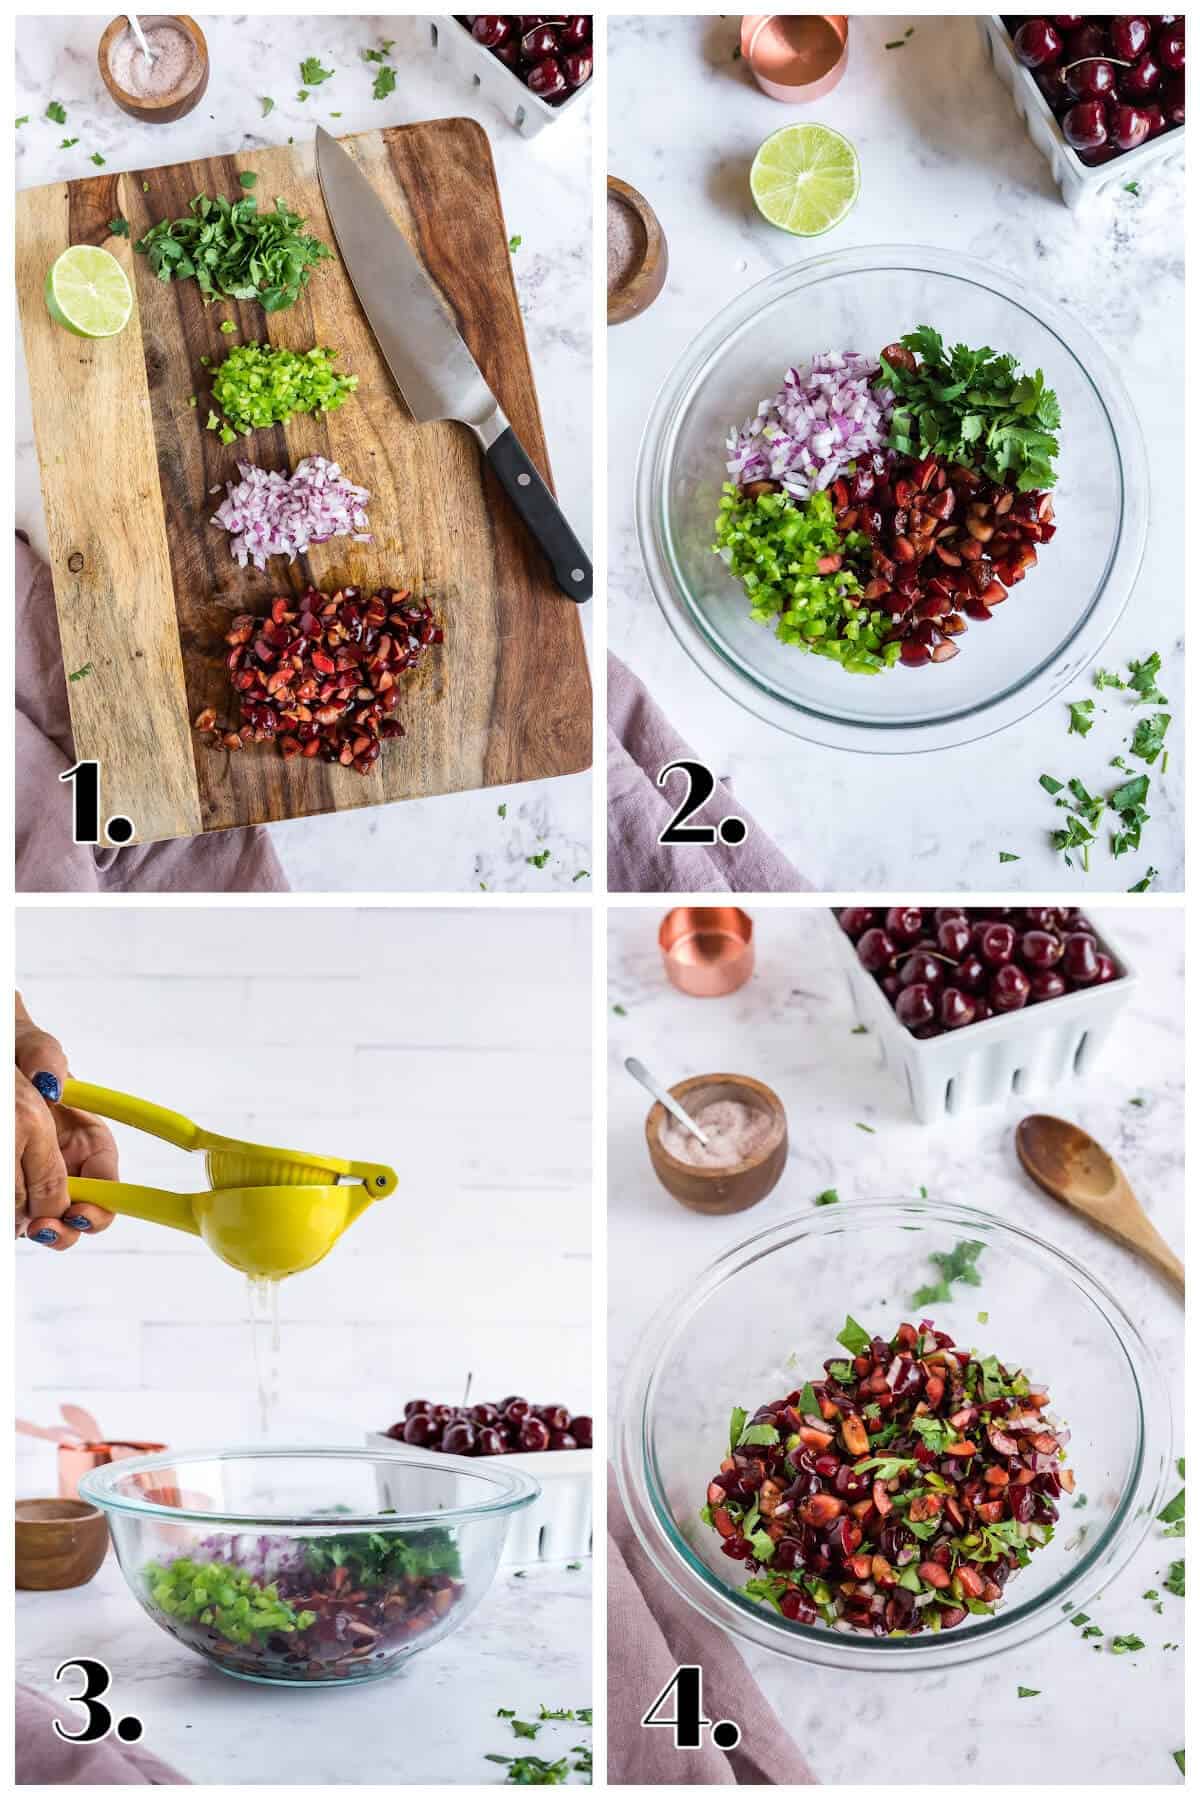 4 image collage showing how to make cherry salsa. 1-chop veggies; 2-place in a bowl, 3- squeeze limes over mixture, 4-stir together.